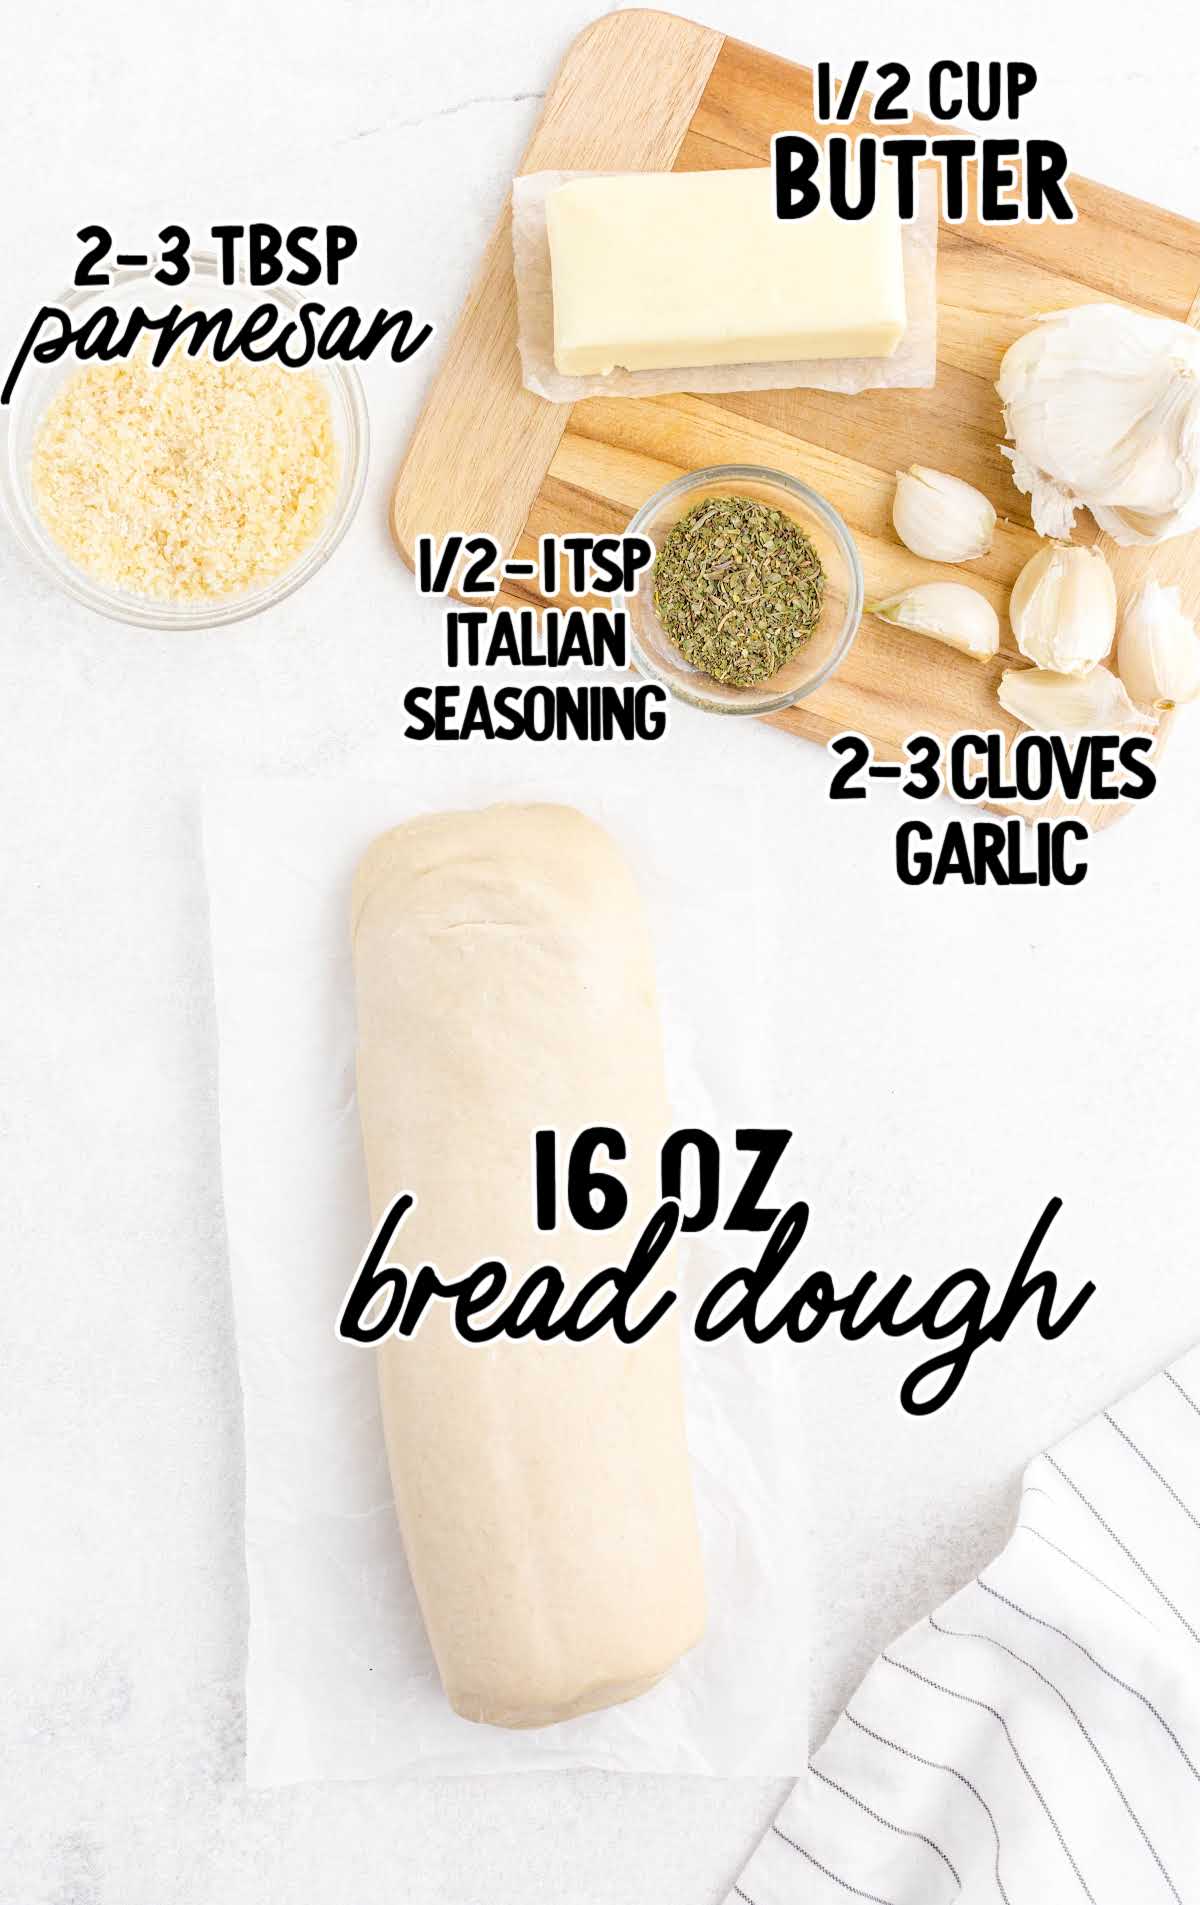 pull-apart garlic bread raw ingredients that are labeled